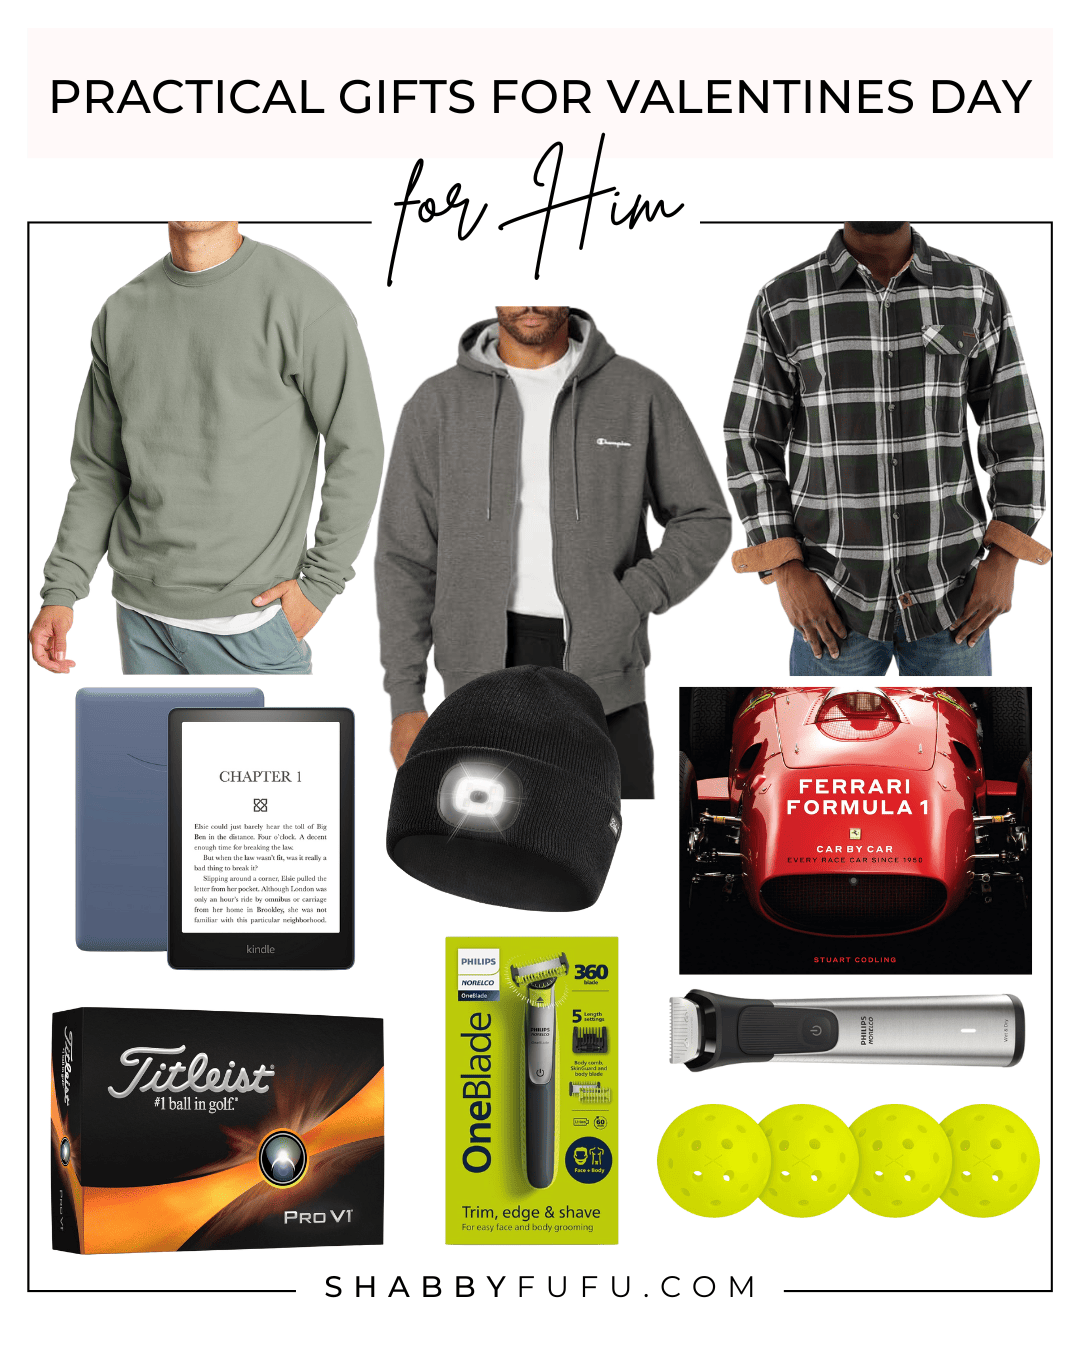 Collage of gift ideas titled "Practical Gifts For Valentine's Day for Him"